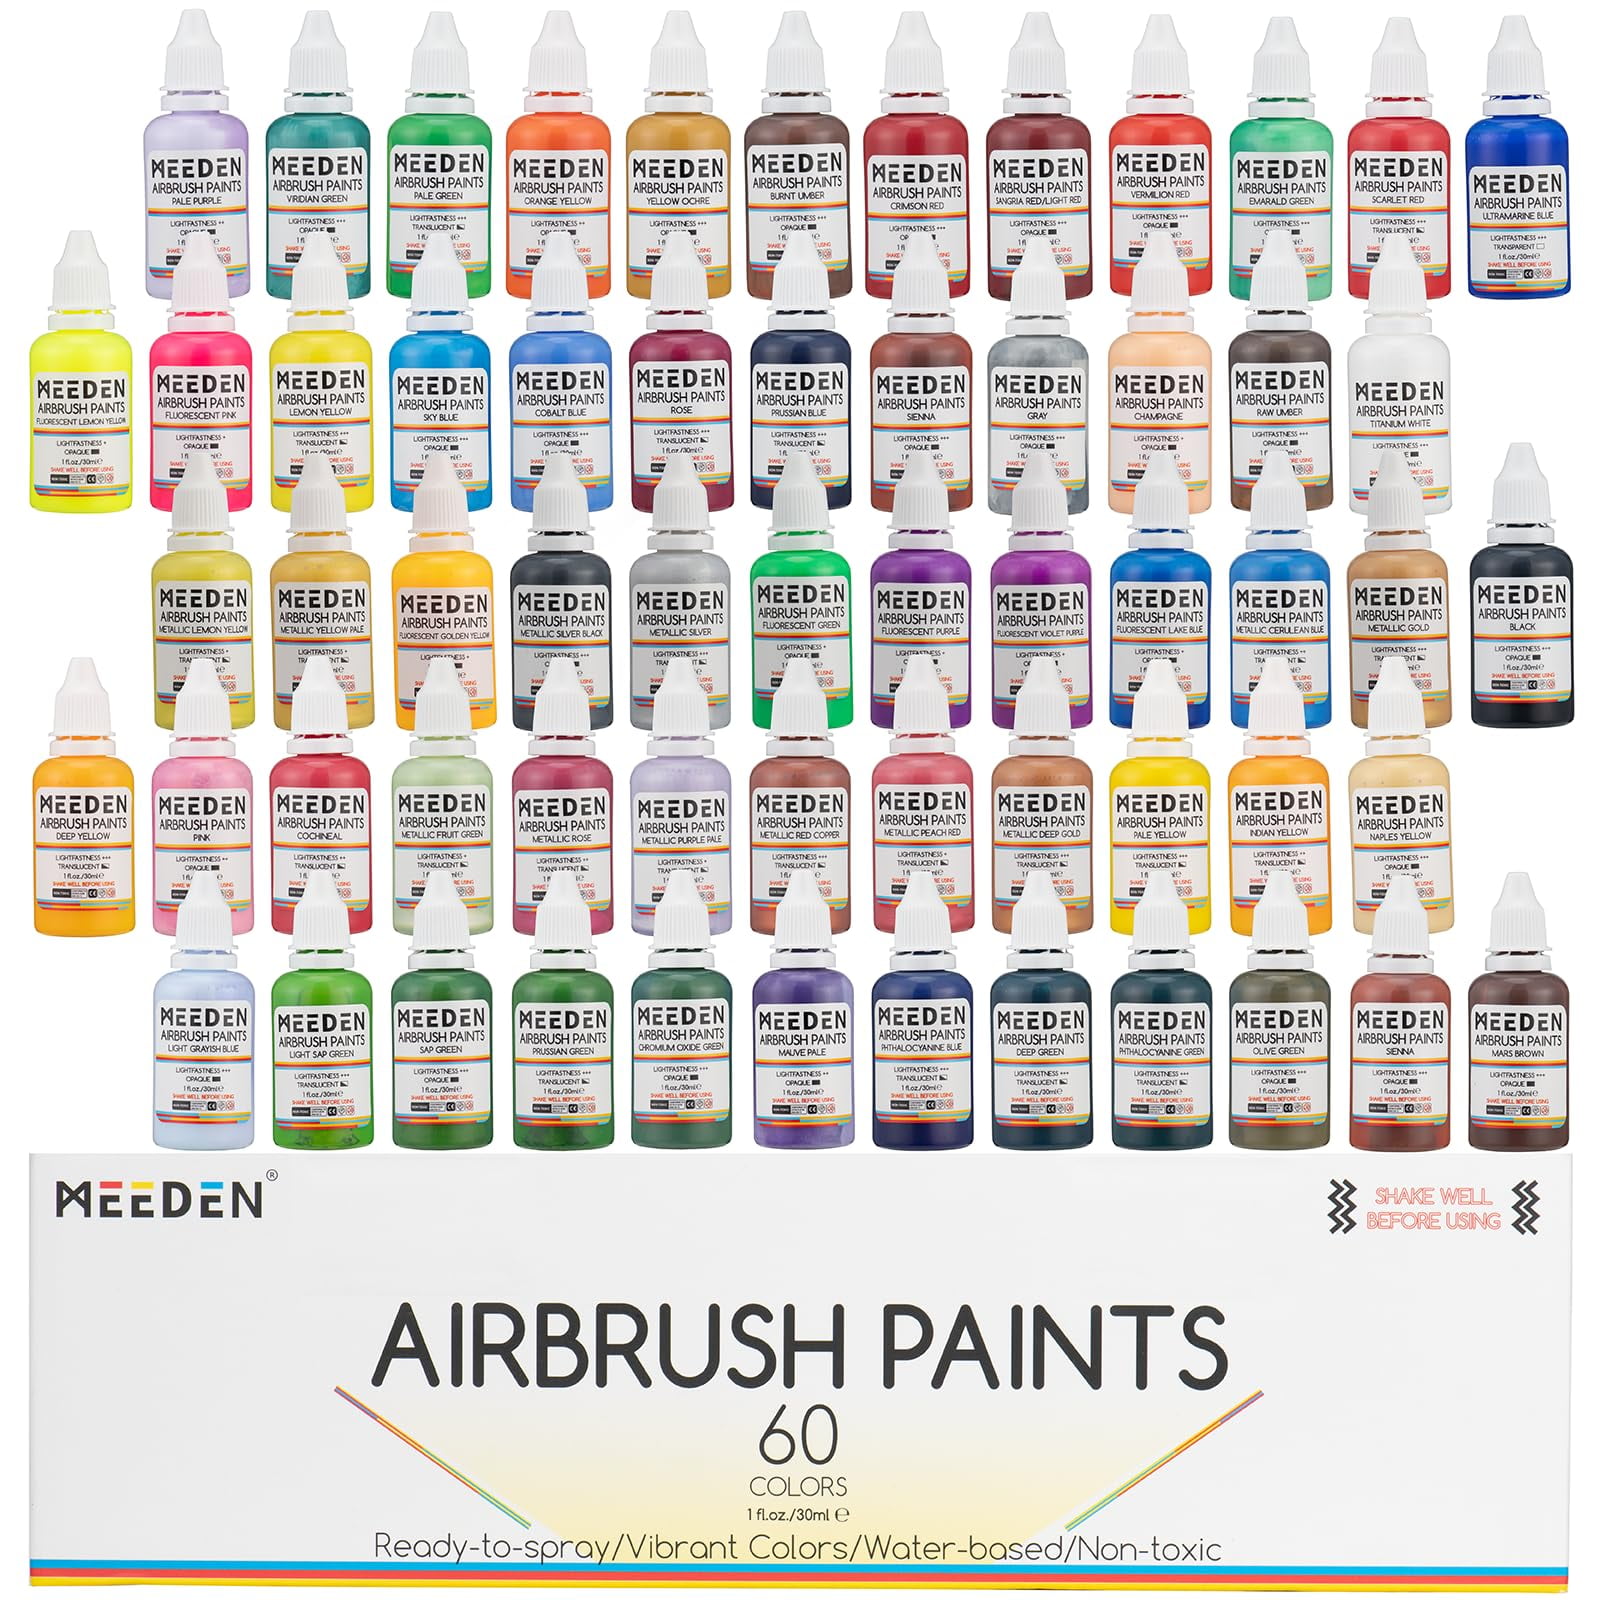  24 Colors Airbrush Paint Set,Opaque & Water-based Acrylic Air  Brush Paint Kit Includes Metallic and Neon Colors, Premium Airbrush Paints  for Artists, Beginners, and Students（30 ml/1 oz） : Arts, Crafts 